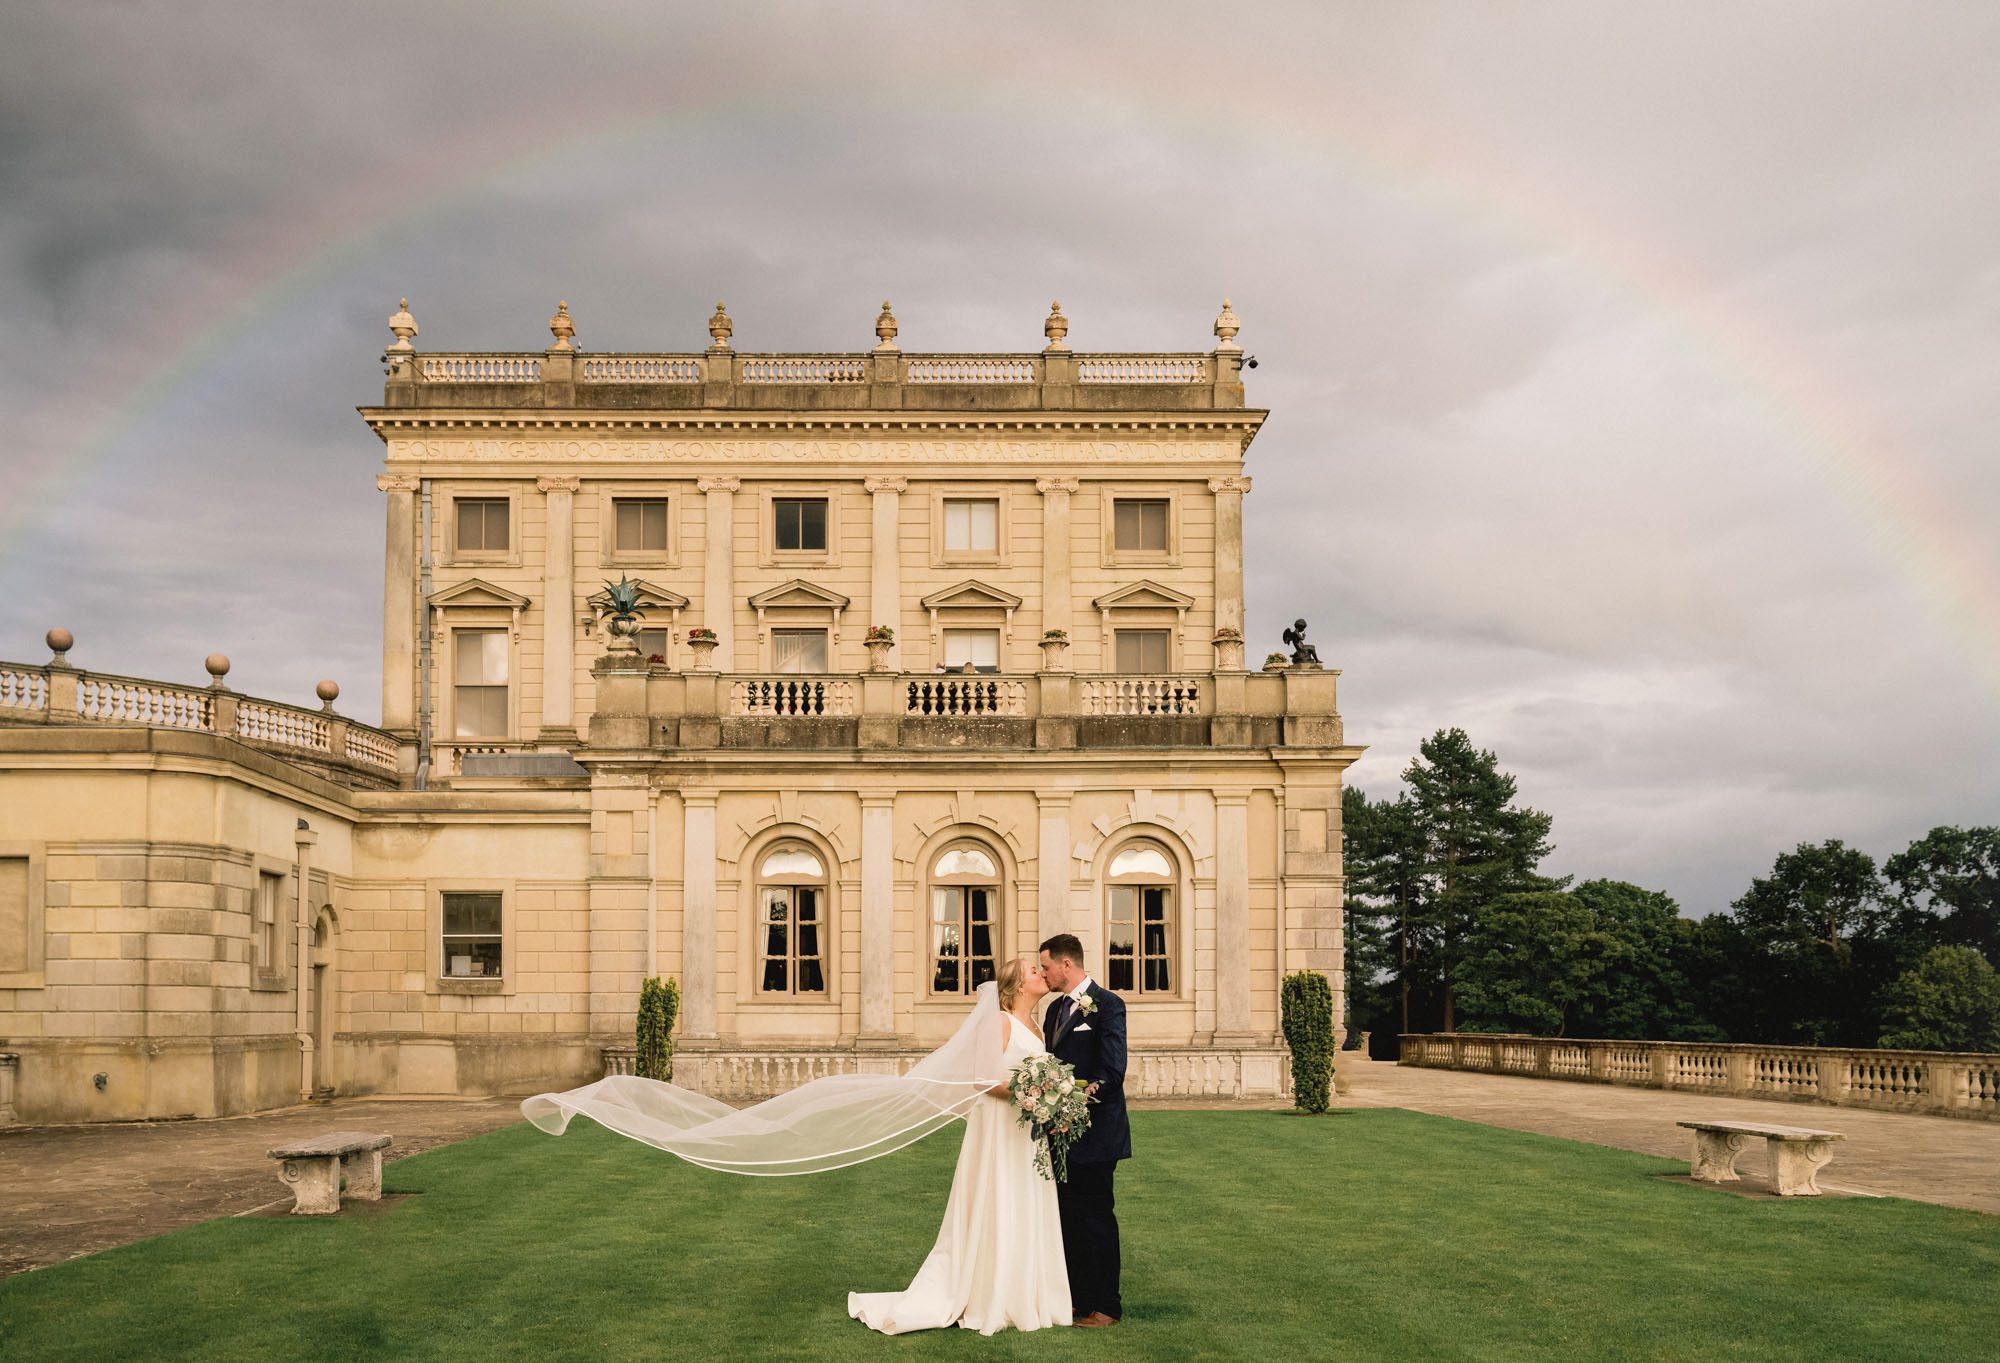 Bride and groom hug closely on their wedding day at Cliveden House.